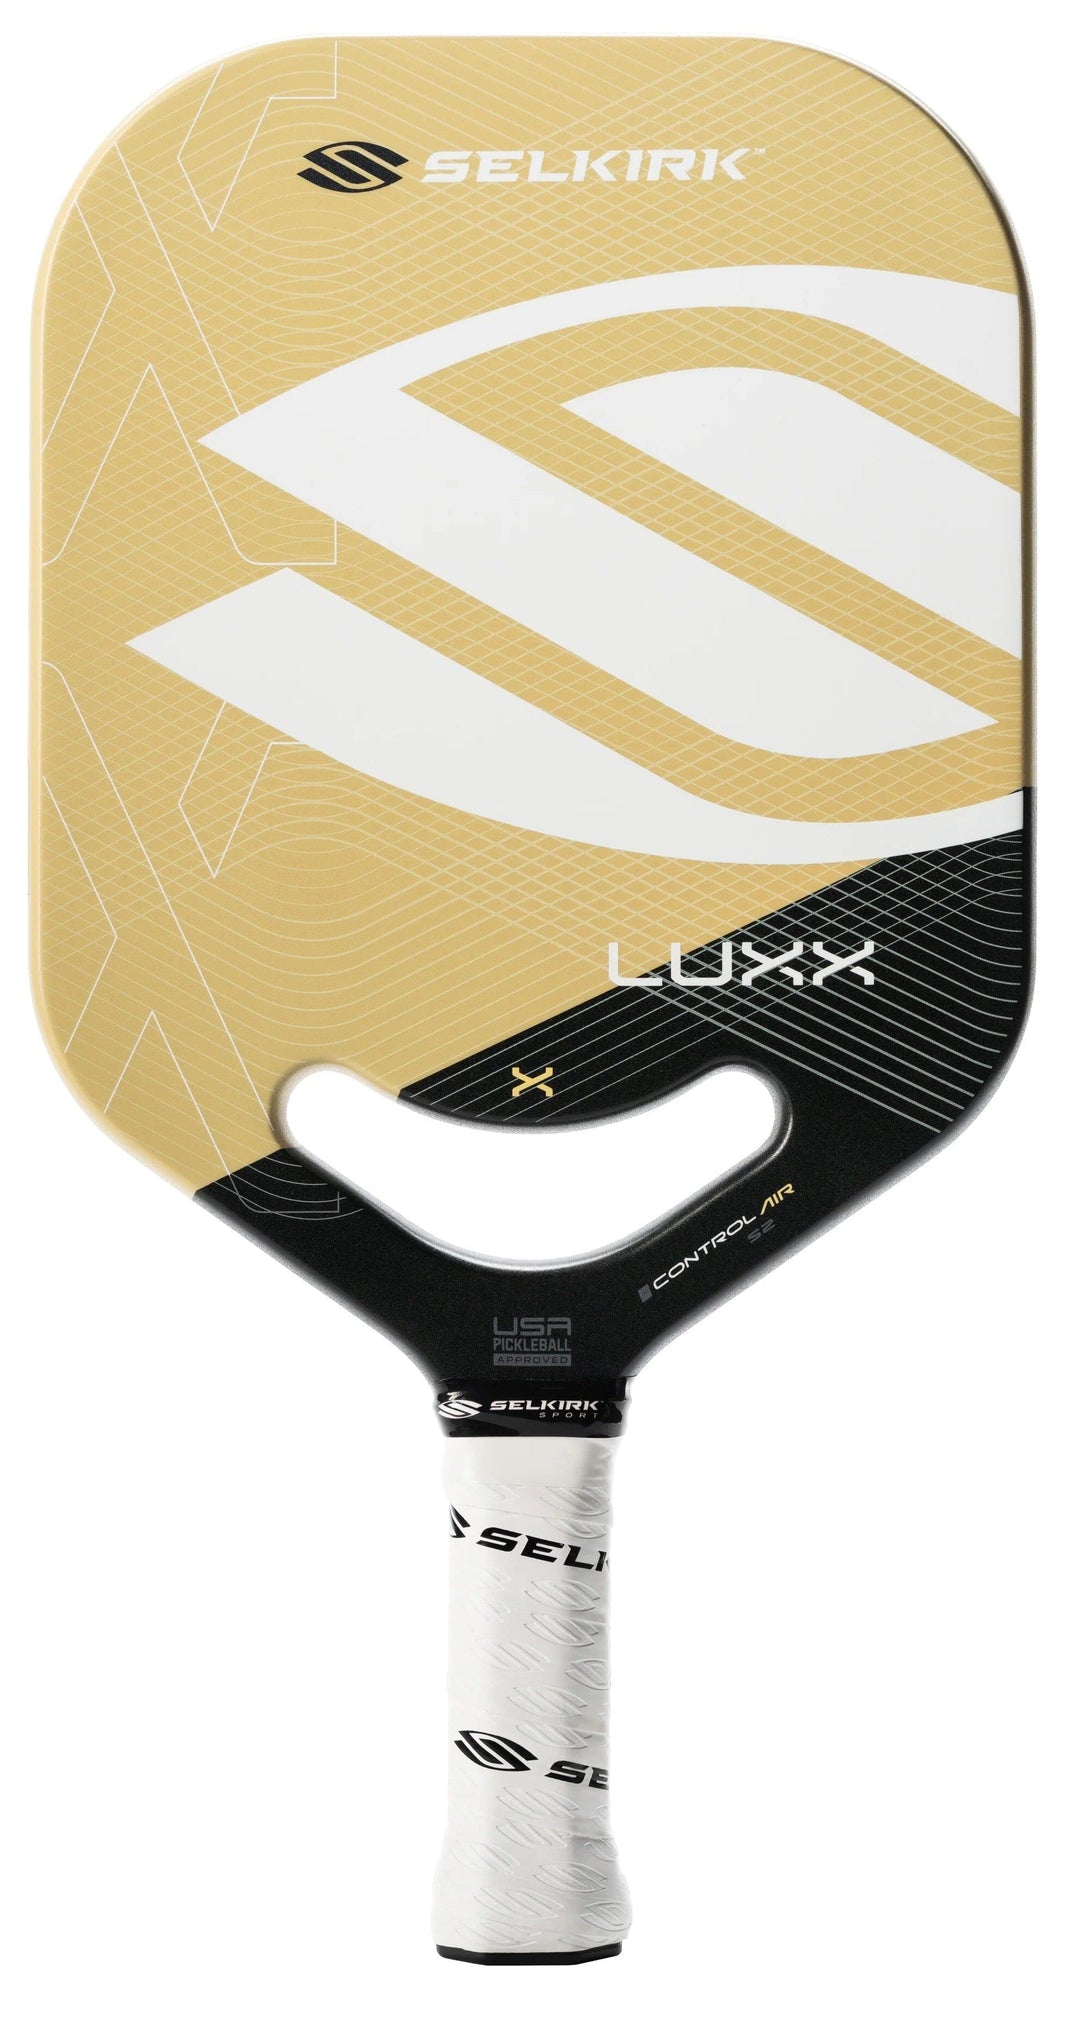 Selkirk Luxx Control Air S2 Pickleball Paddle Pickleball Paddles Selkirk Medium (7.8-8.2oz) Gold 